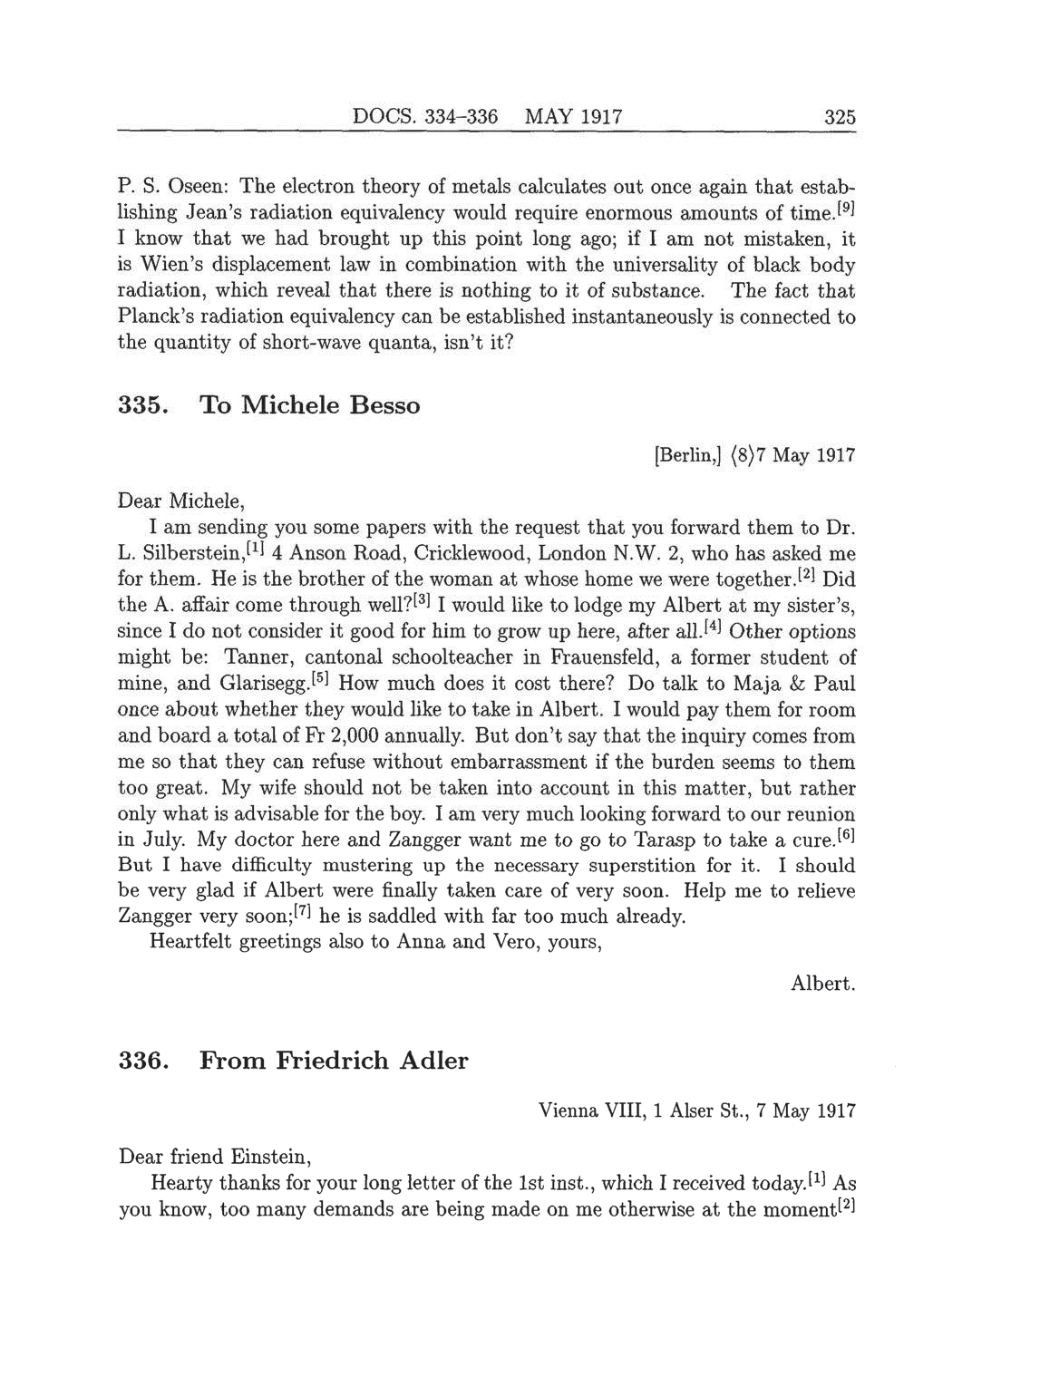 Volume 8: The Berlin Years: Correspondence, 1914-1918 (English translation supplement) page 325